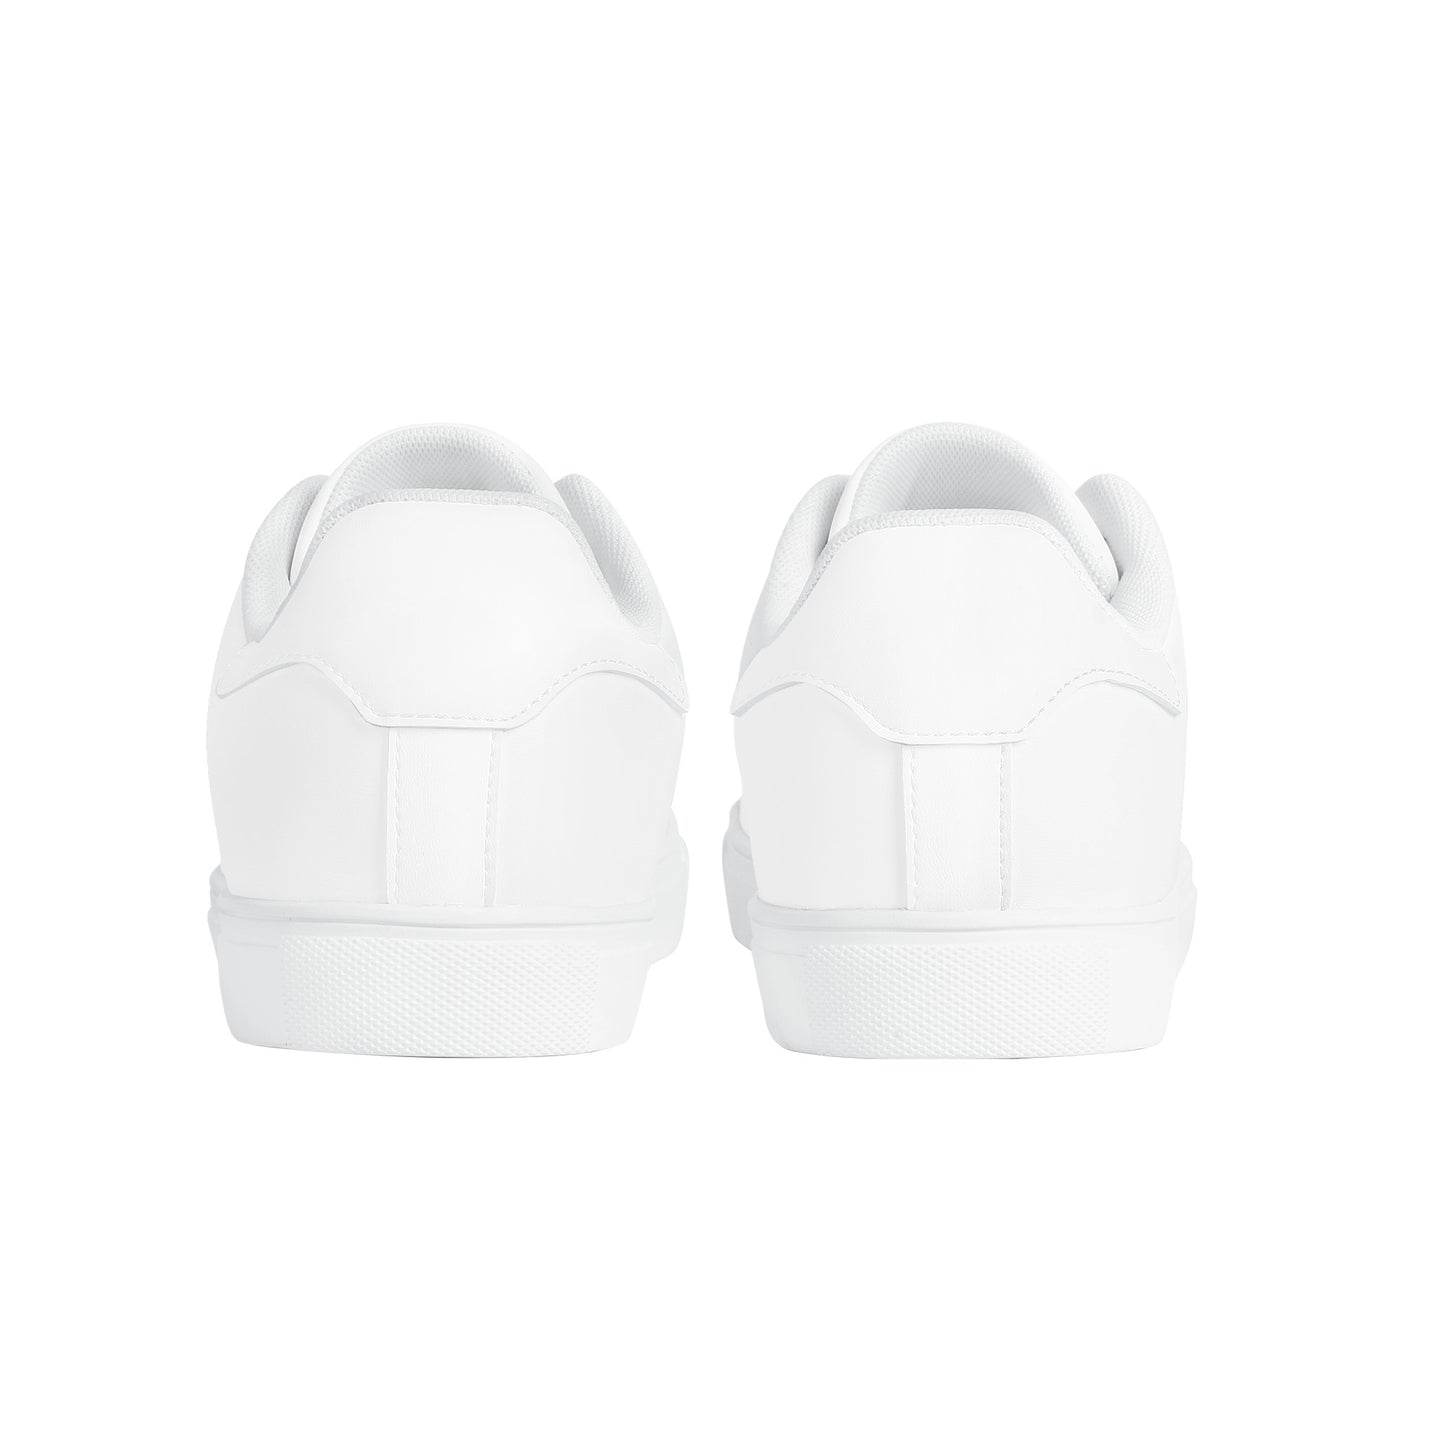 Create Your Own - Low Top Synthetic Leather Sneakers - White